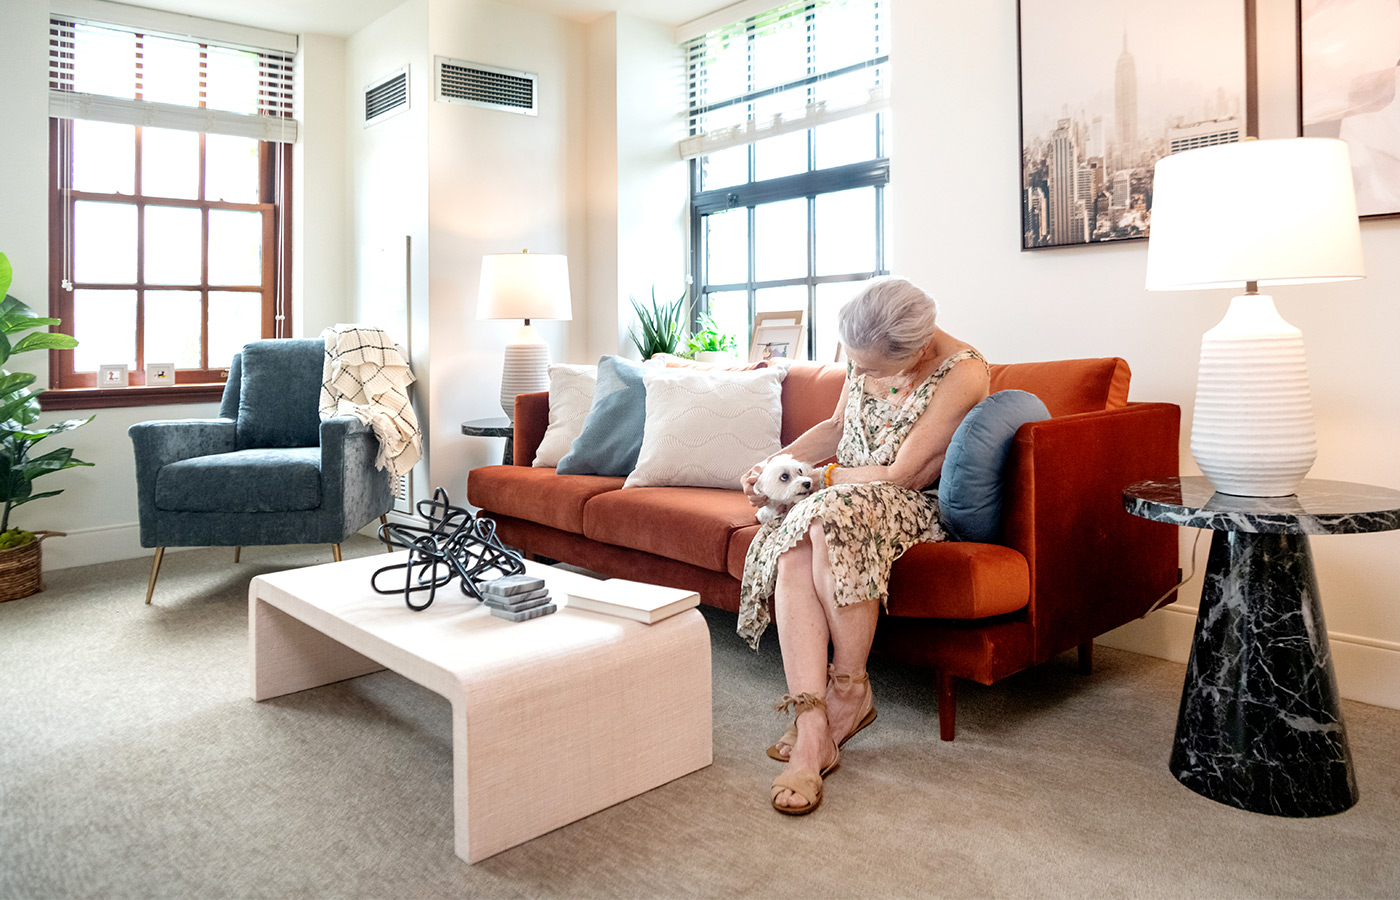 Woman in her furnished living room space with sofa, table, and seating area.
